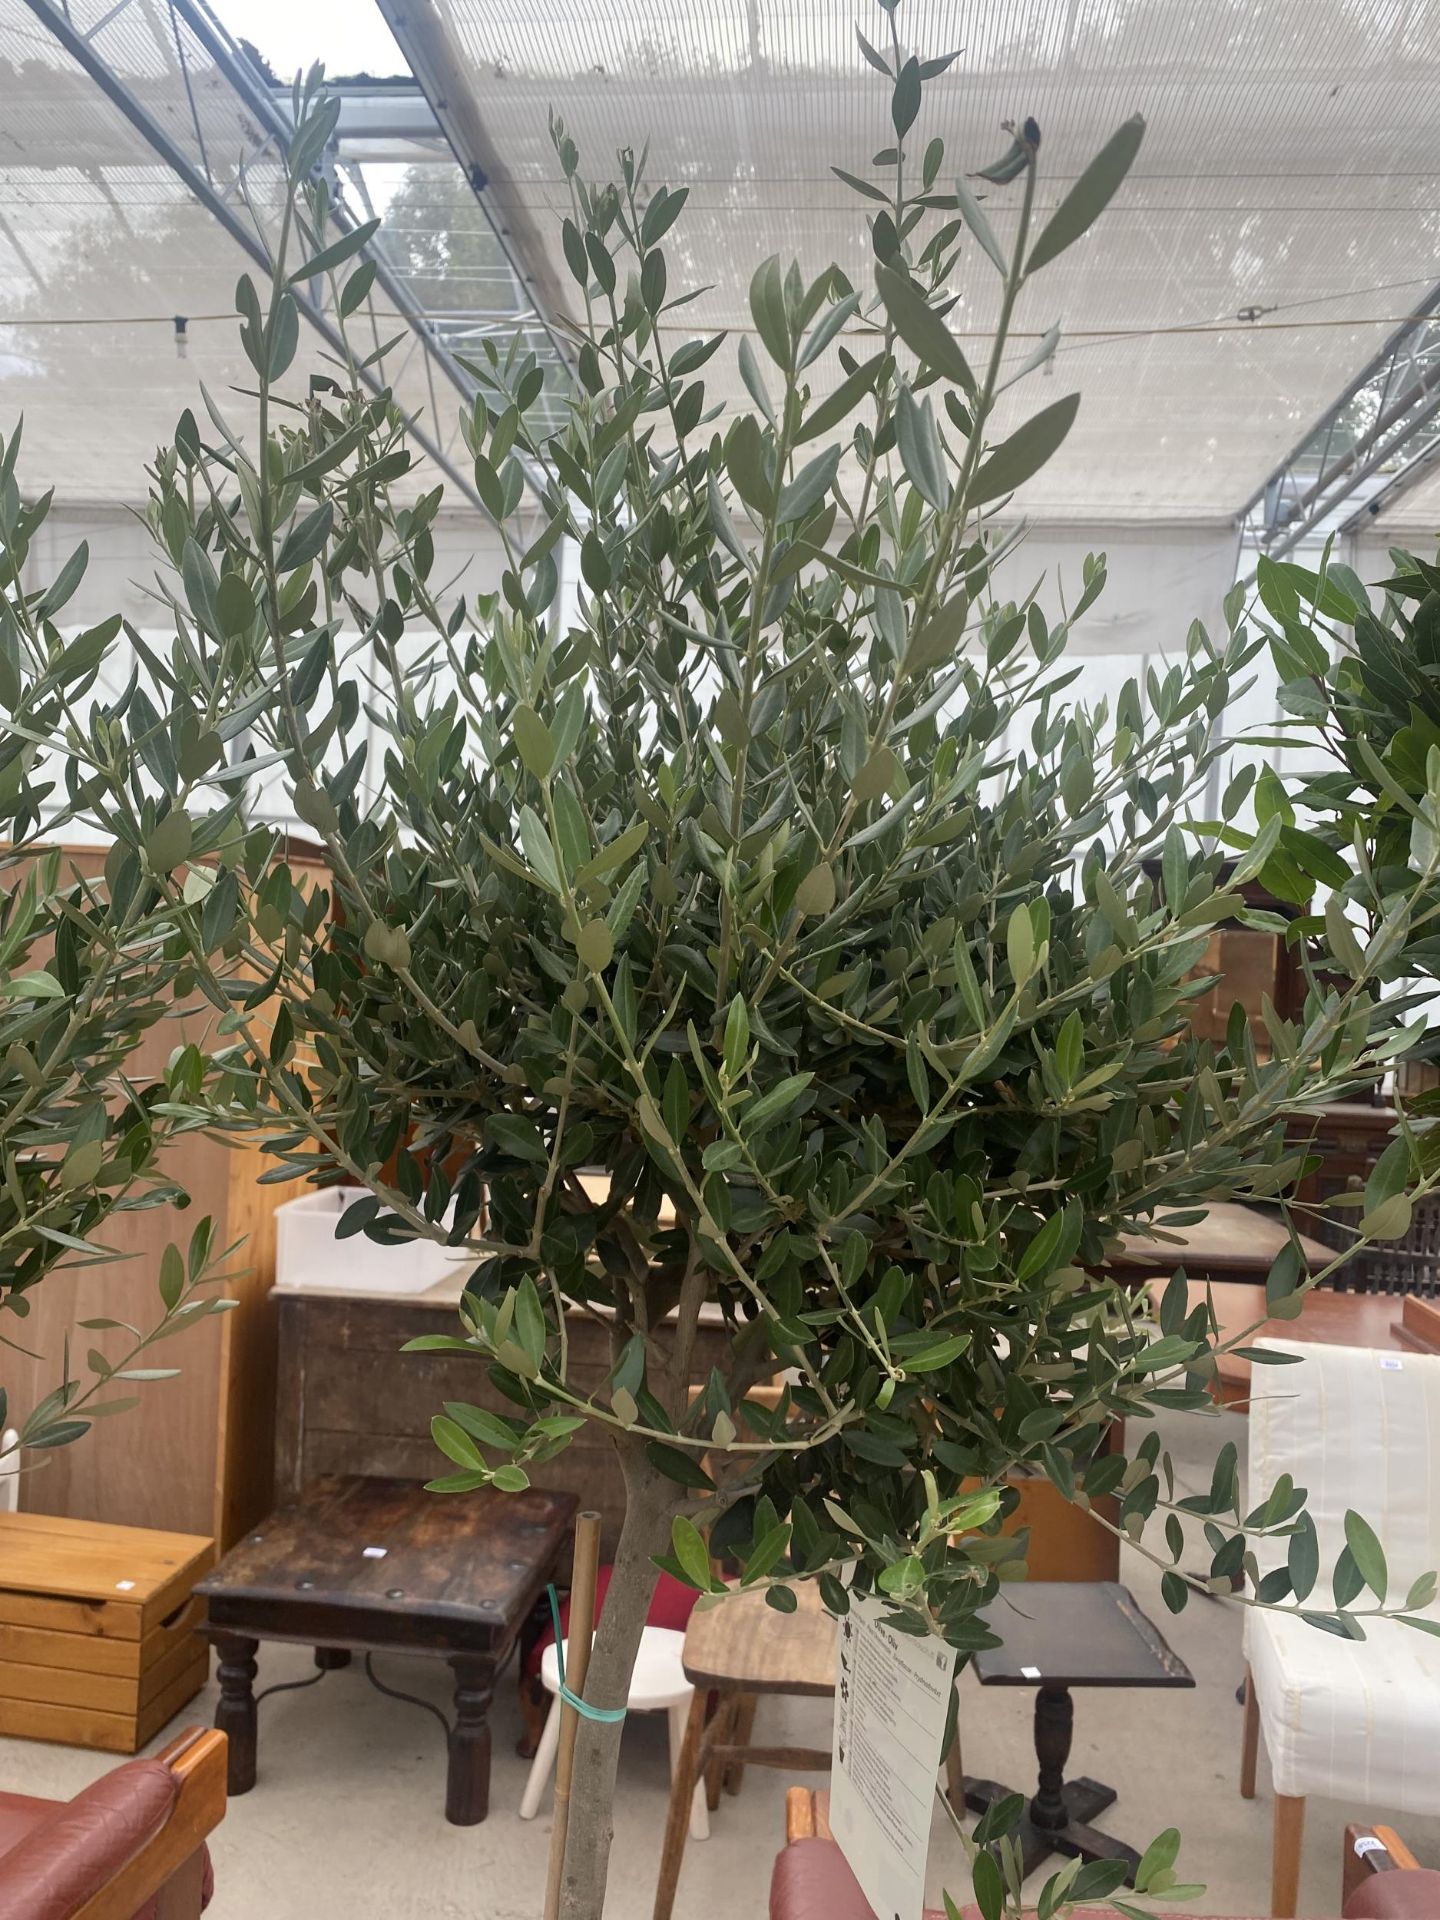 A STANDARD OLEA EUROPAEA OLIVE TREE (APPROX 6FT) - Image 3 of 3